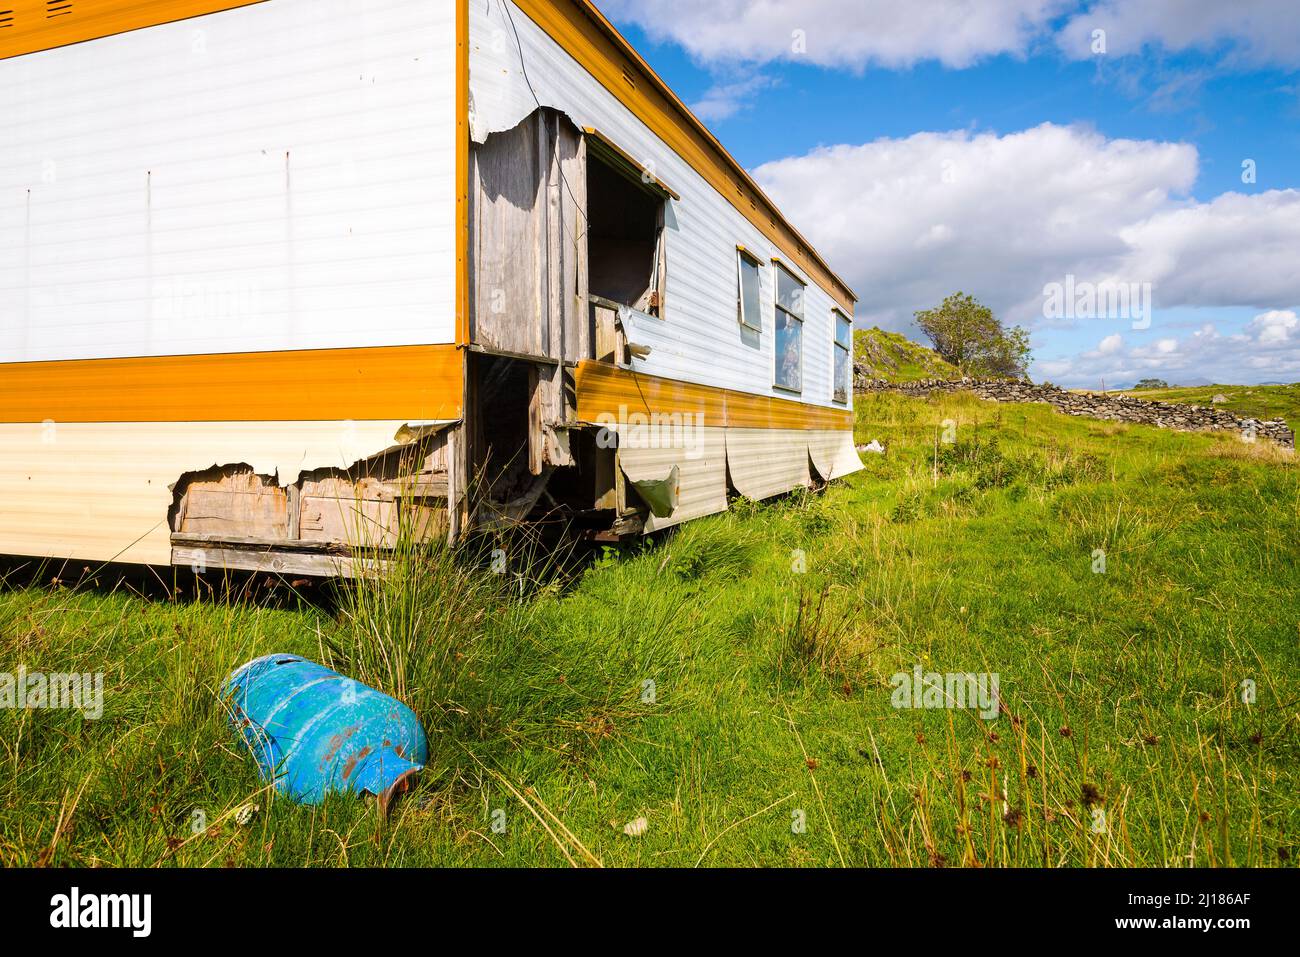 Sun shines on an old gas cannister and a derelict mobile home abandoned in the countryside on the island of Lismore in Scotland. Stock Photo